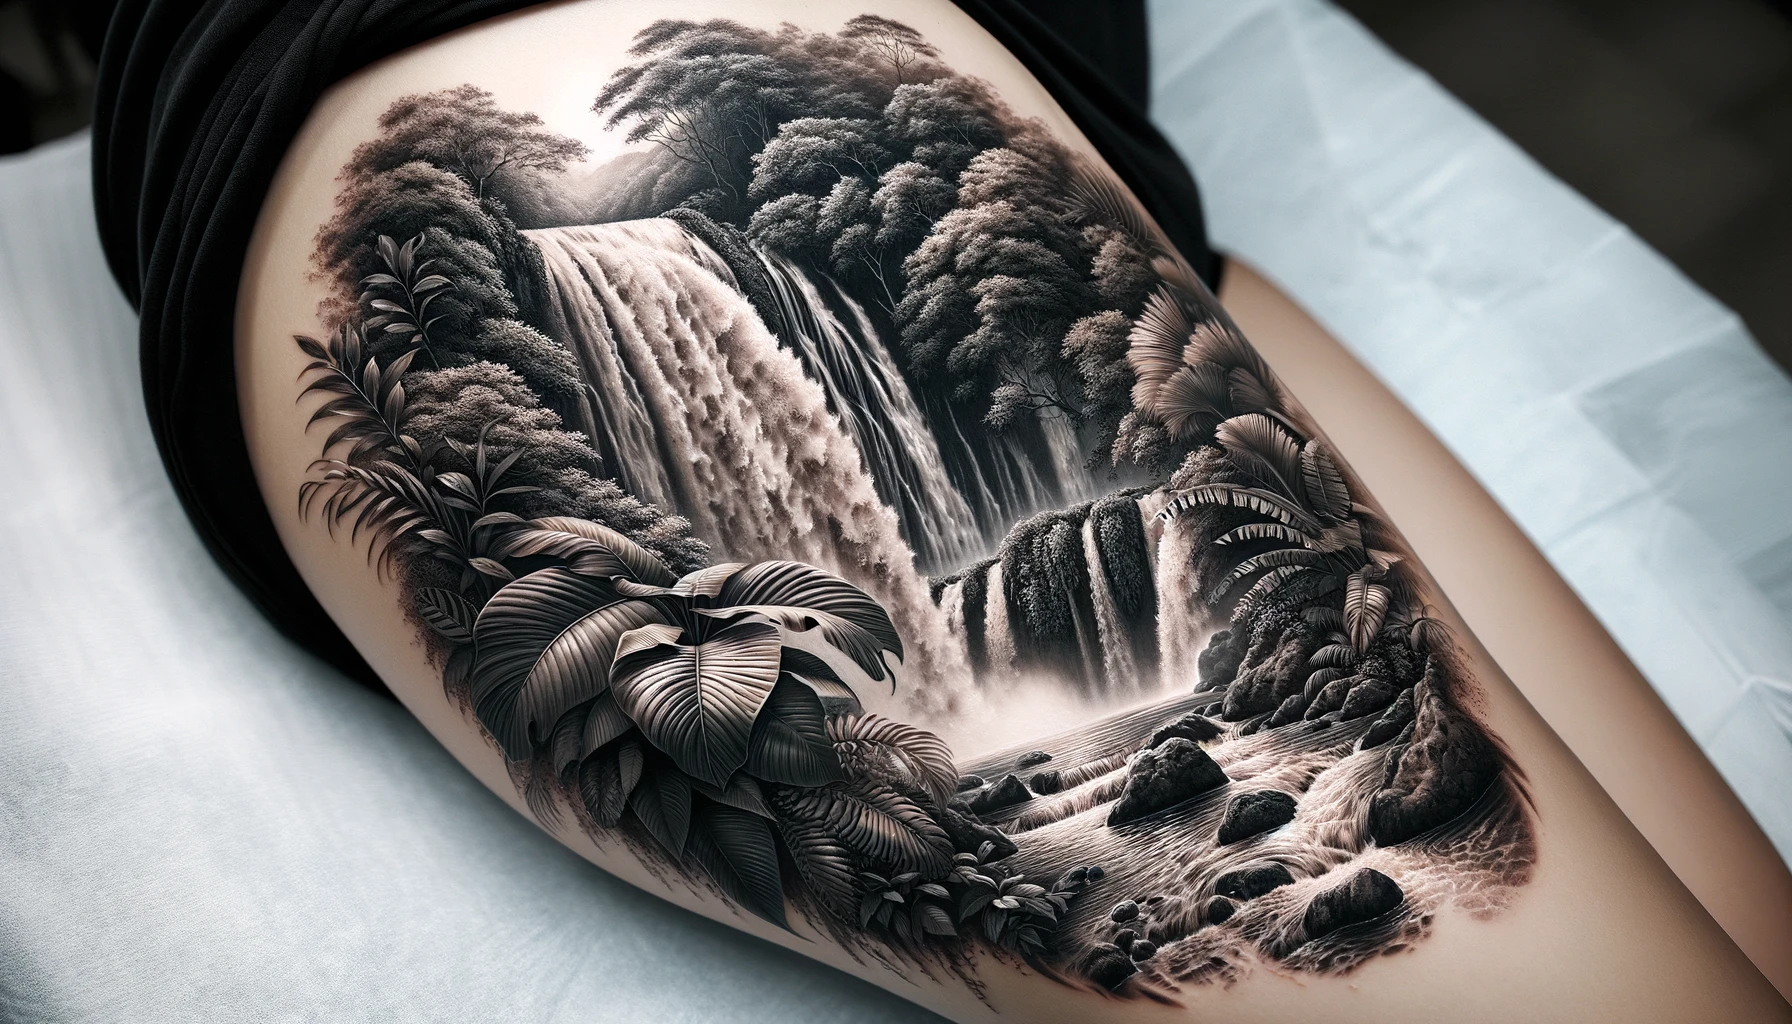 DALL·E 2024-03-25 16.13.57 - A realistic tattoo design of the La Fortuna Waterfall, inked on a person's skin. The tattoo should capture the cascading water of the waterfall, surro